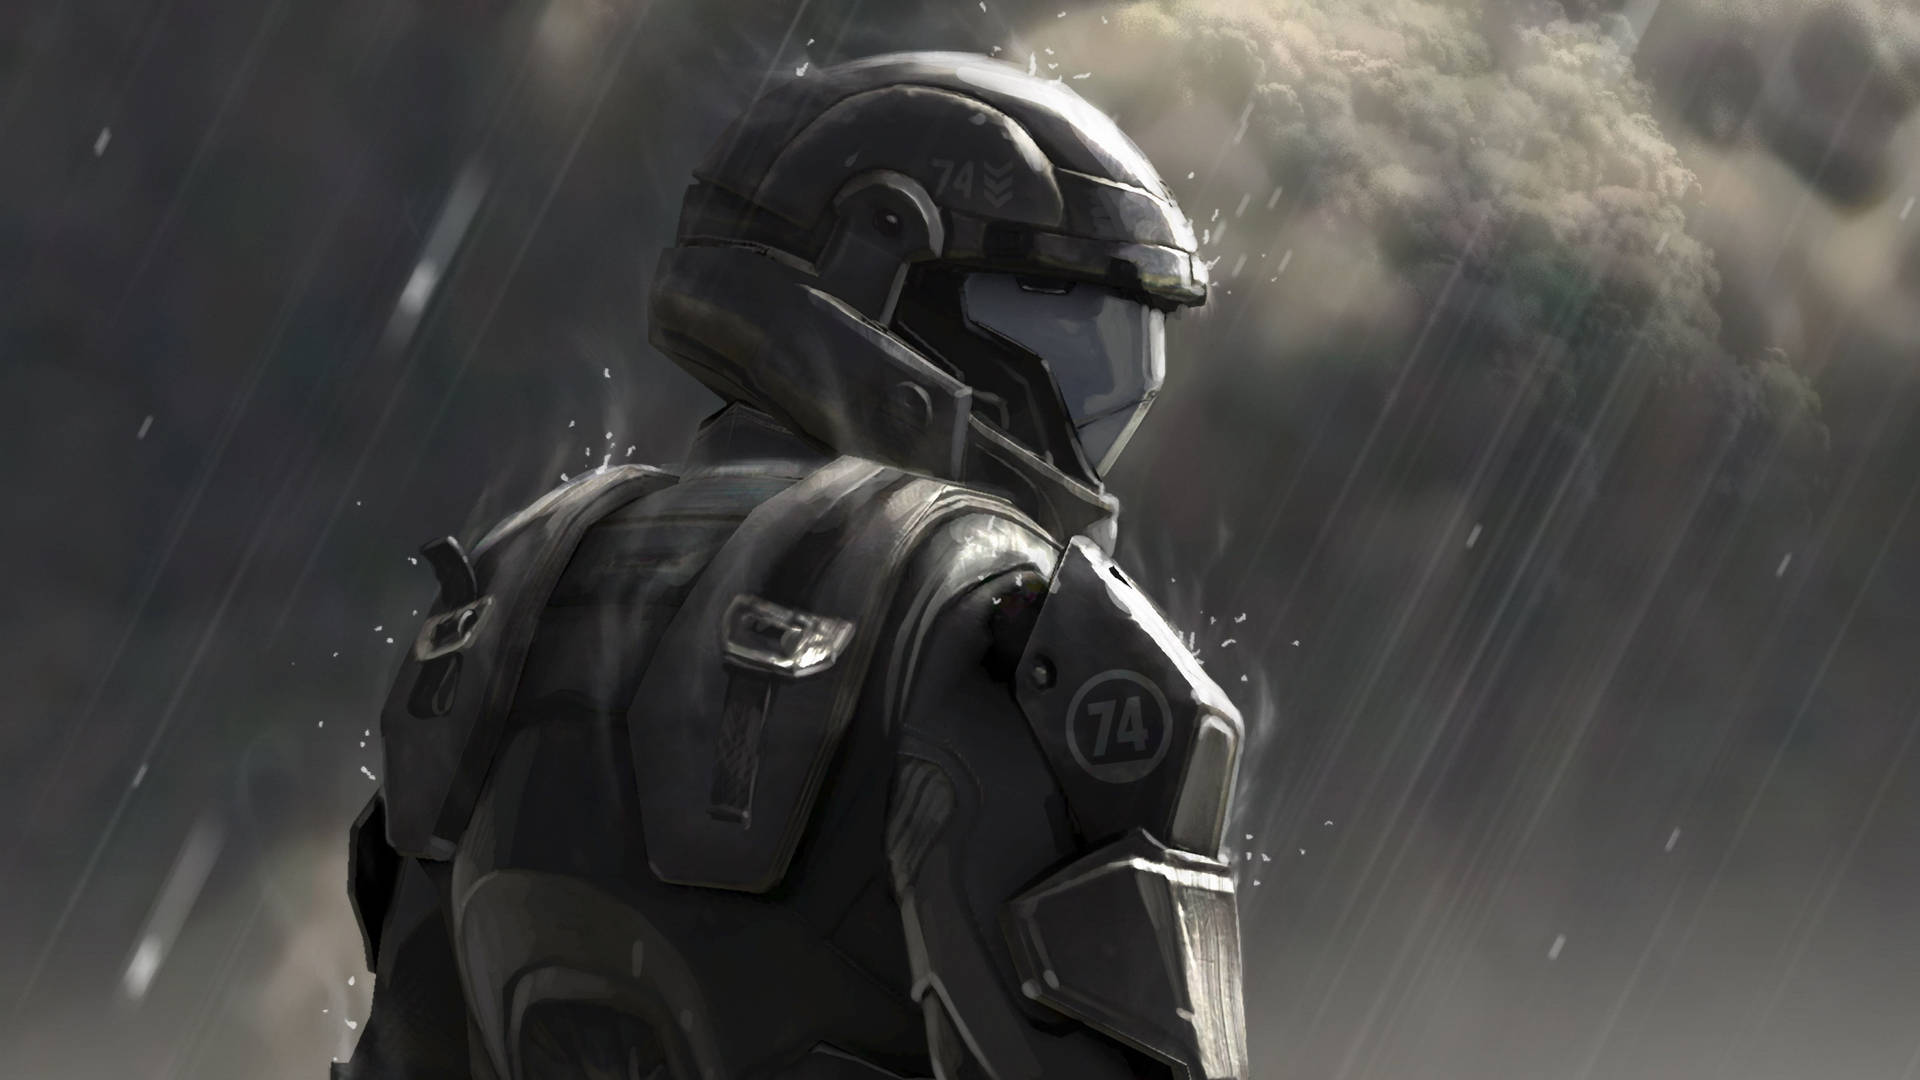 Caption: Immersive 3d Gaming Experience With Halo 3: Odst Wallpaper